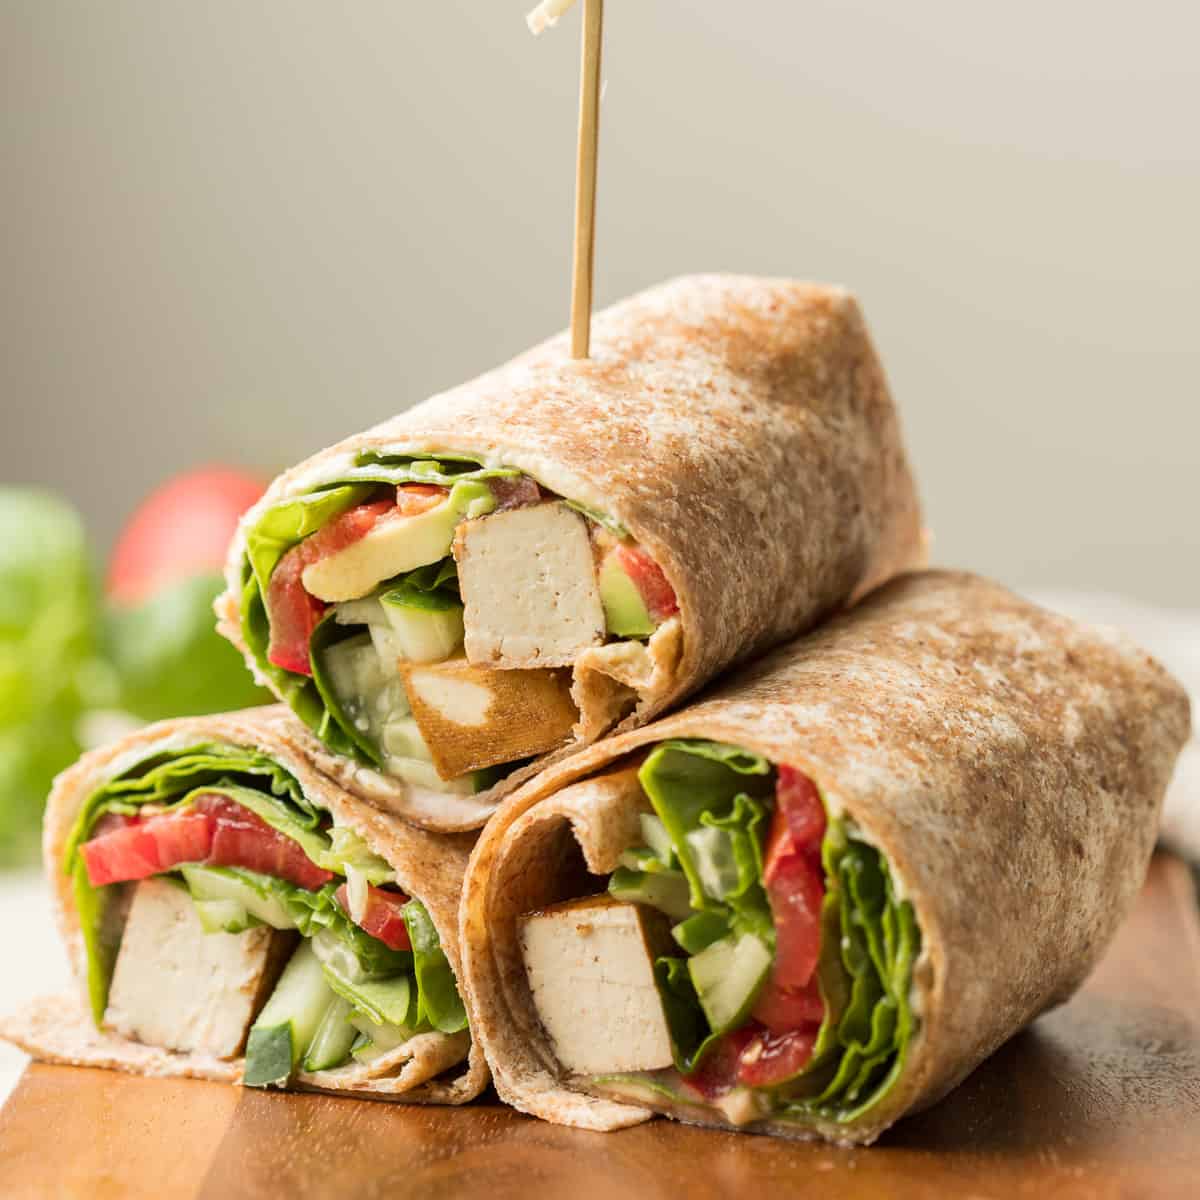 Three Vegan Wrap Halves Stacked in a Triangle